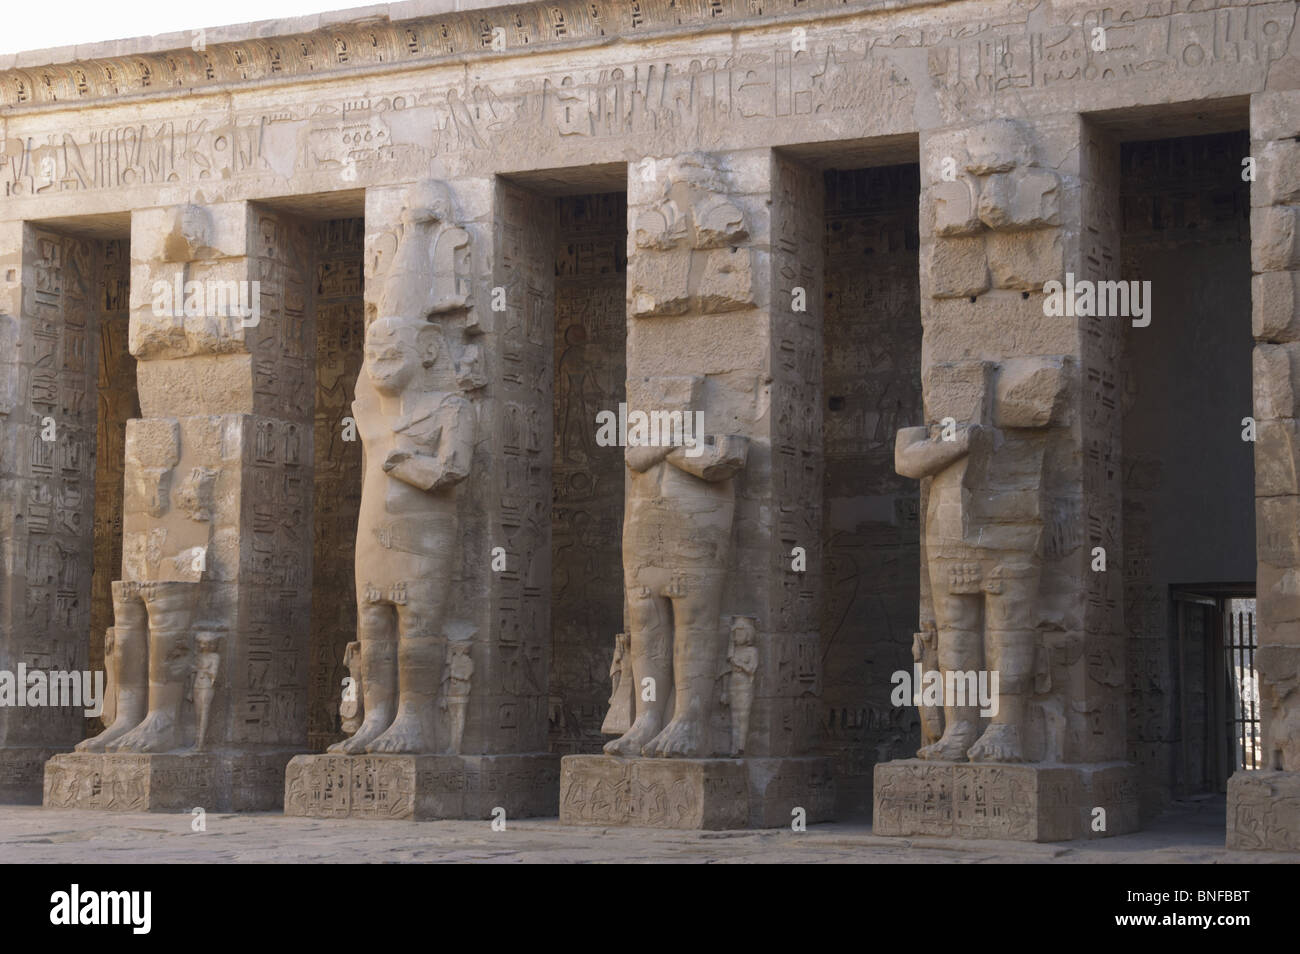 Temple of Ramses III. Great colossal statues of Ramses III deified as Osiris, attached to pillars. Egypt. Stock Photo